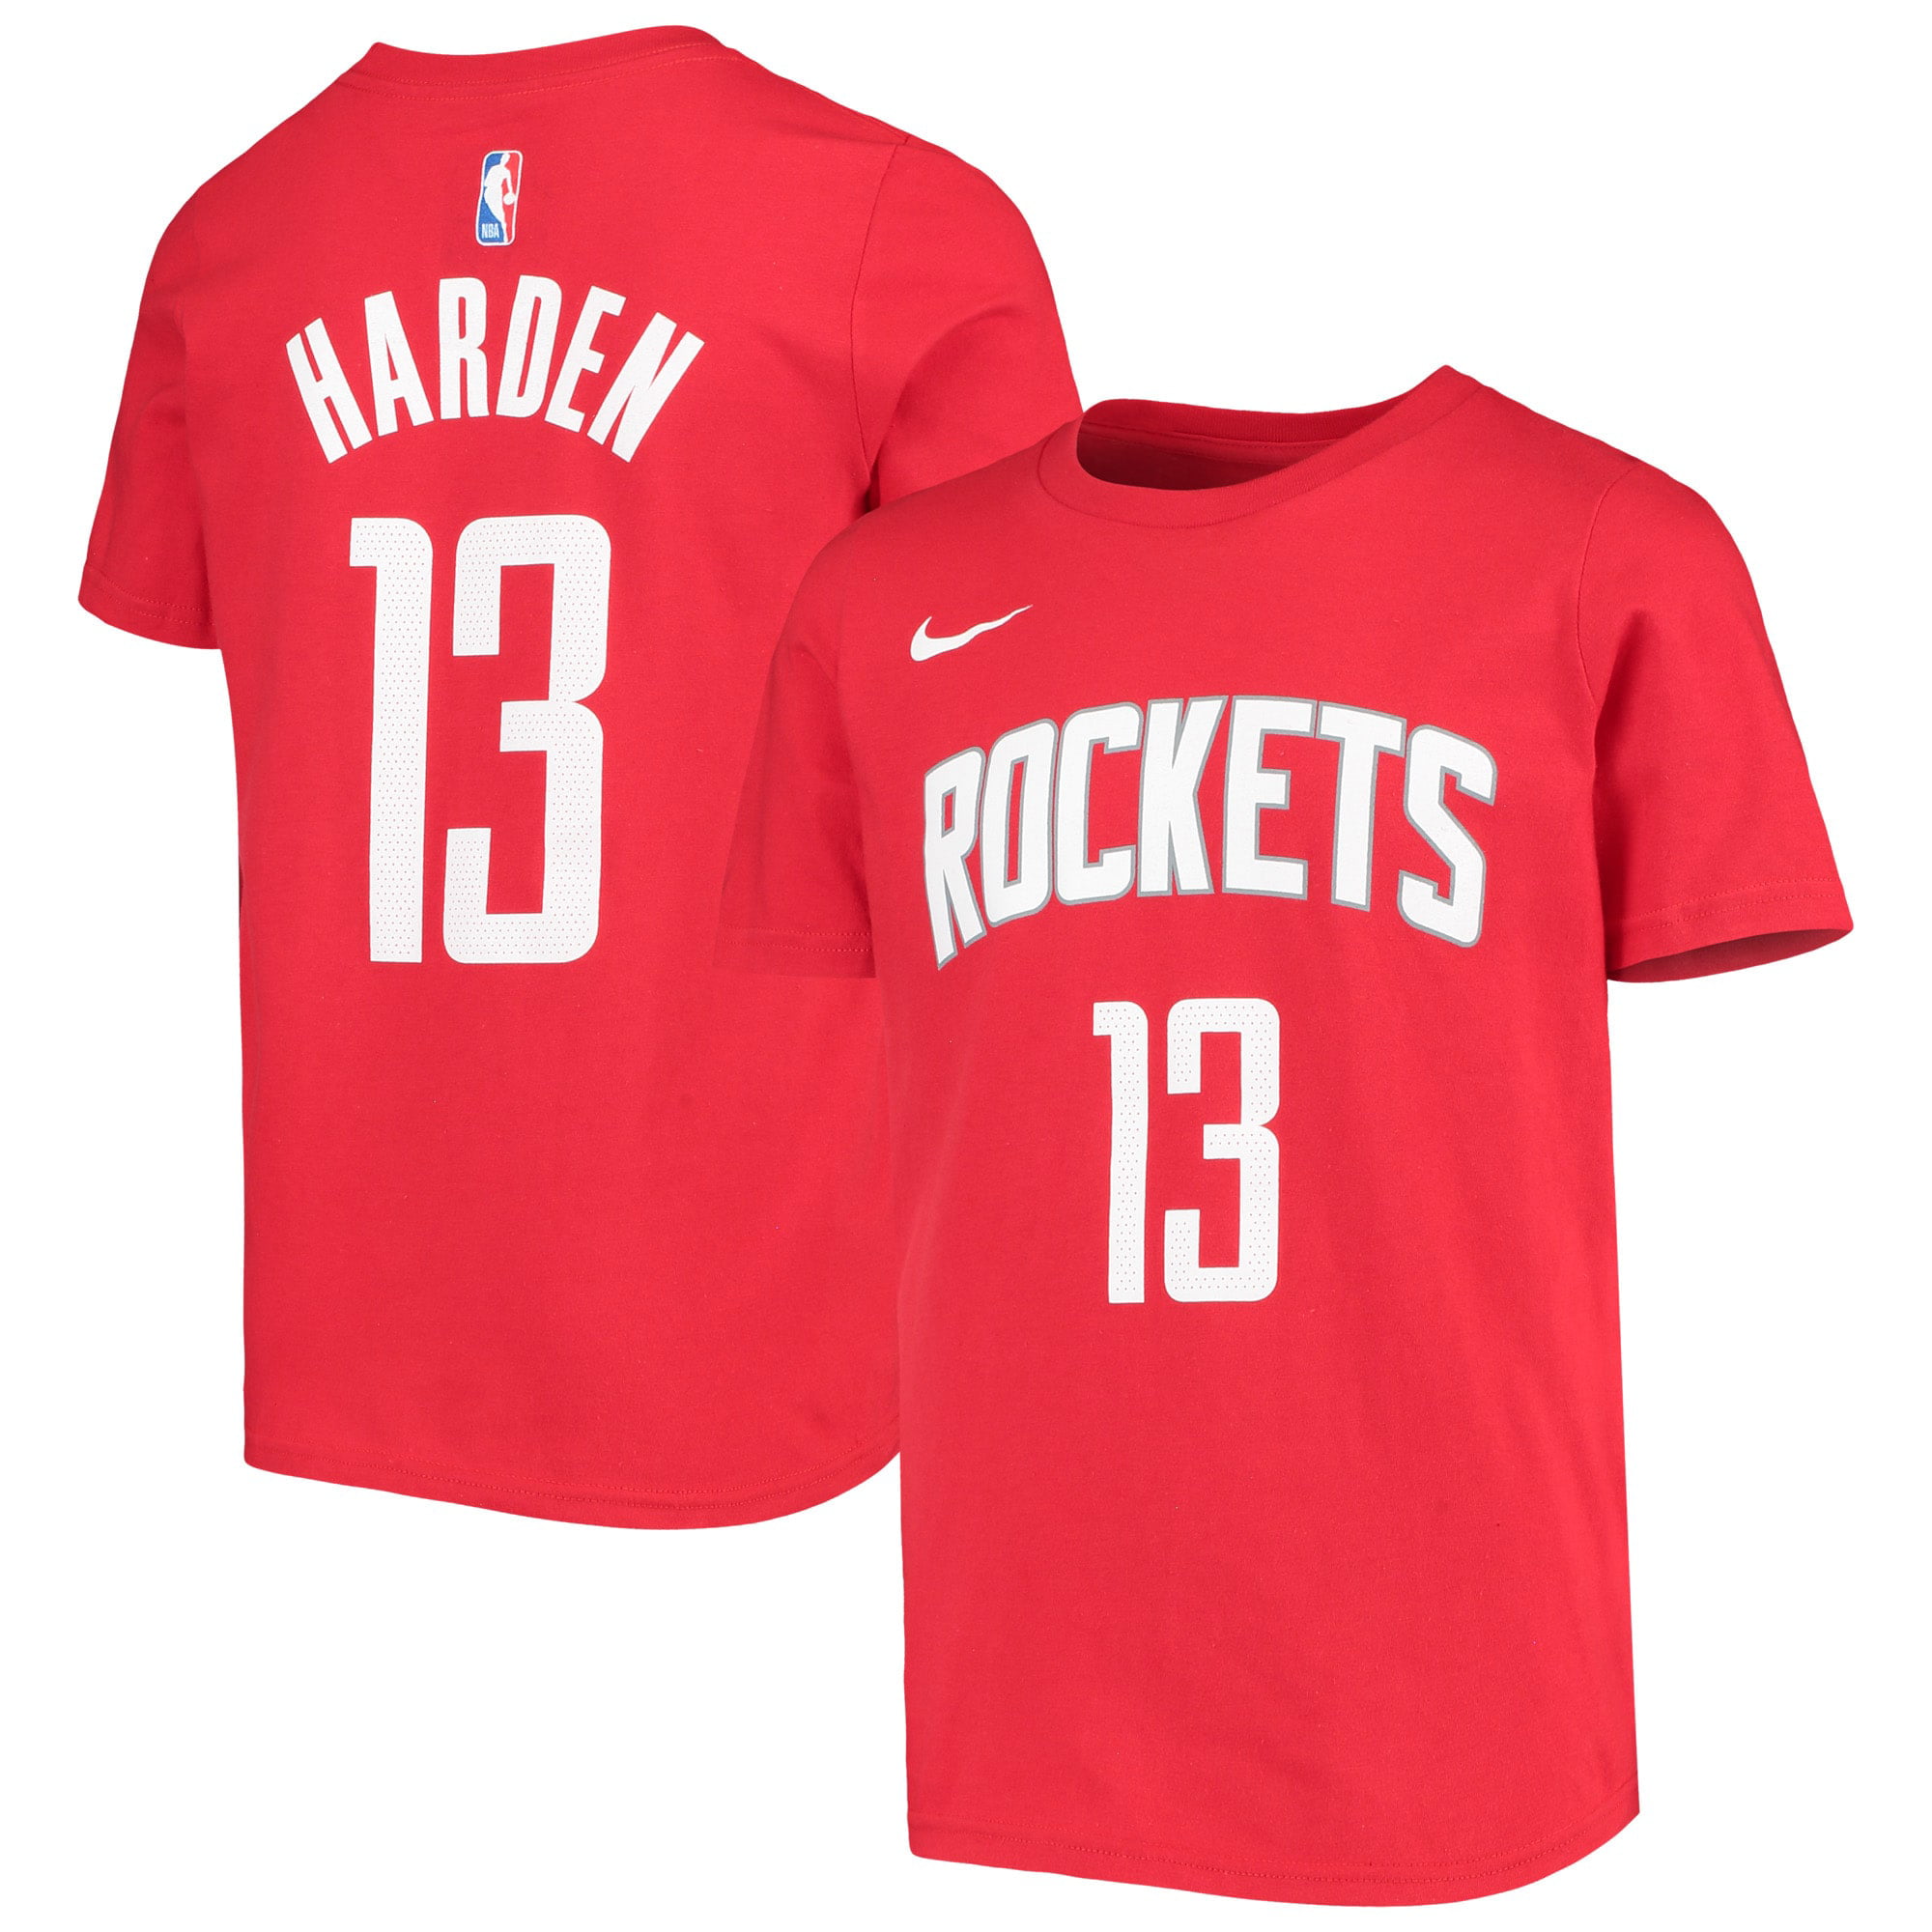 OuterStuff James Harden Houston Rockets Youth Black Name and Number Player T-Shirt Small 8 